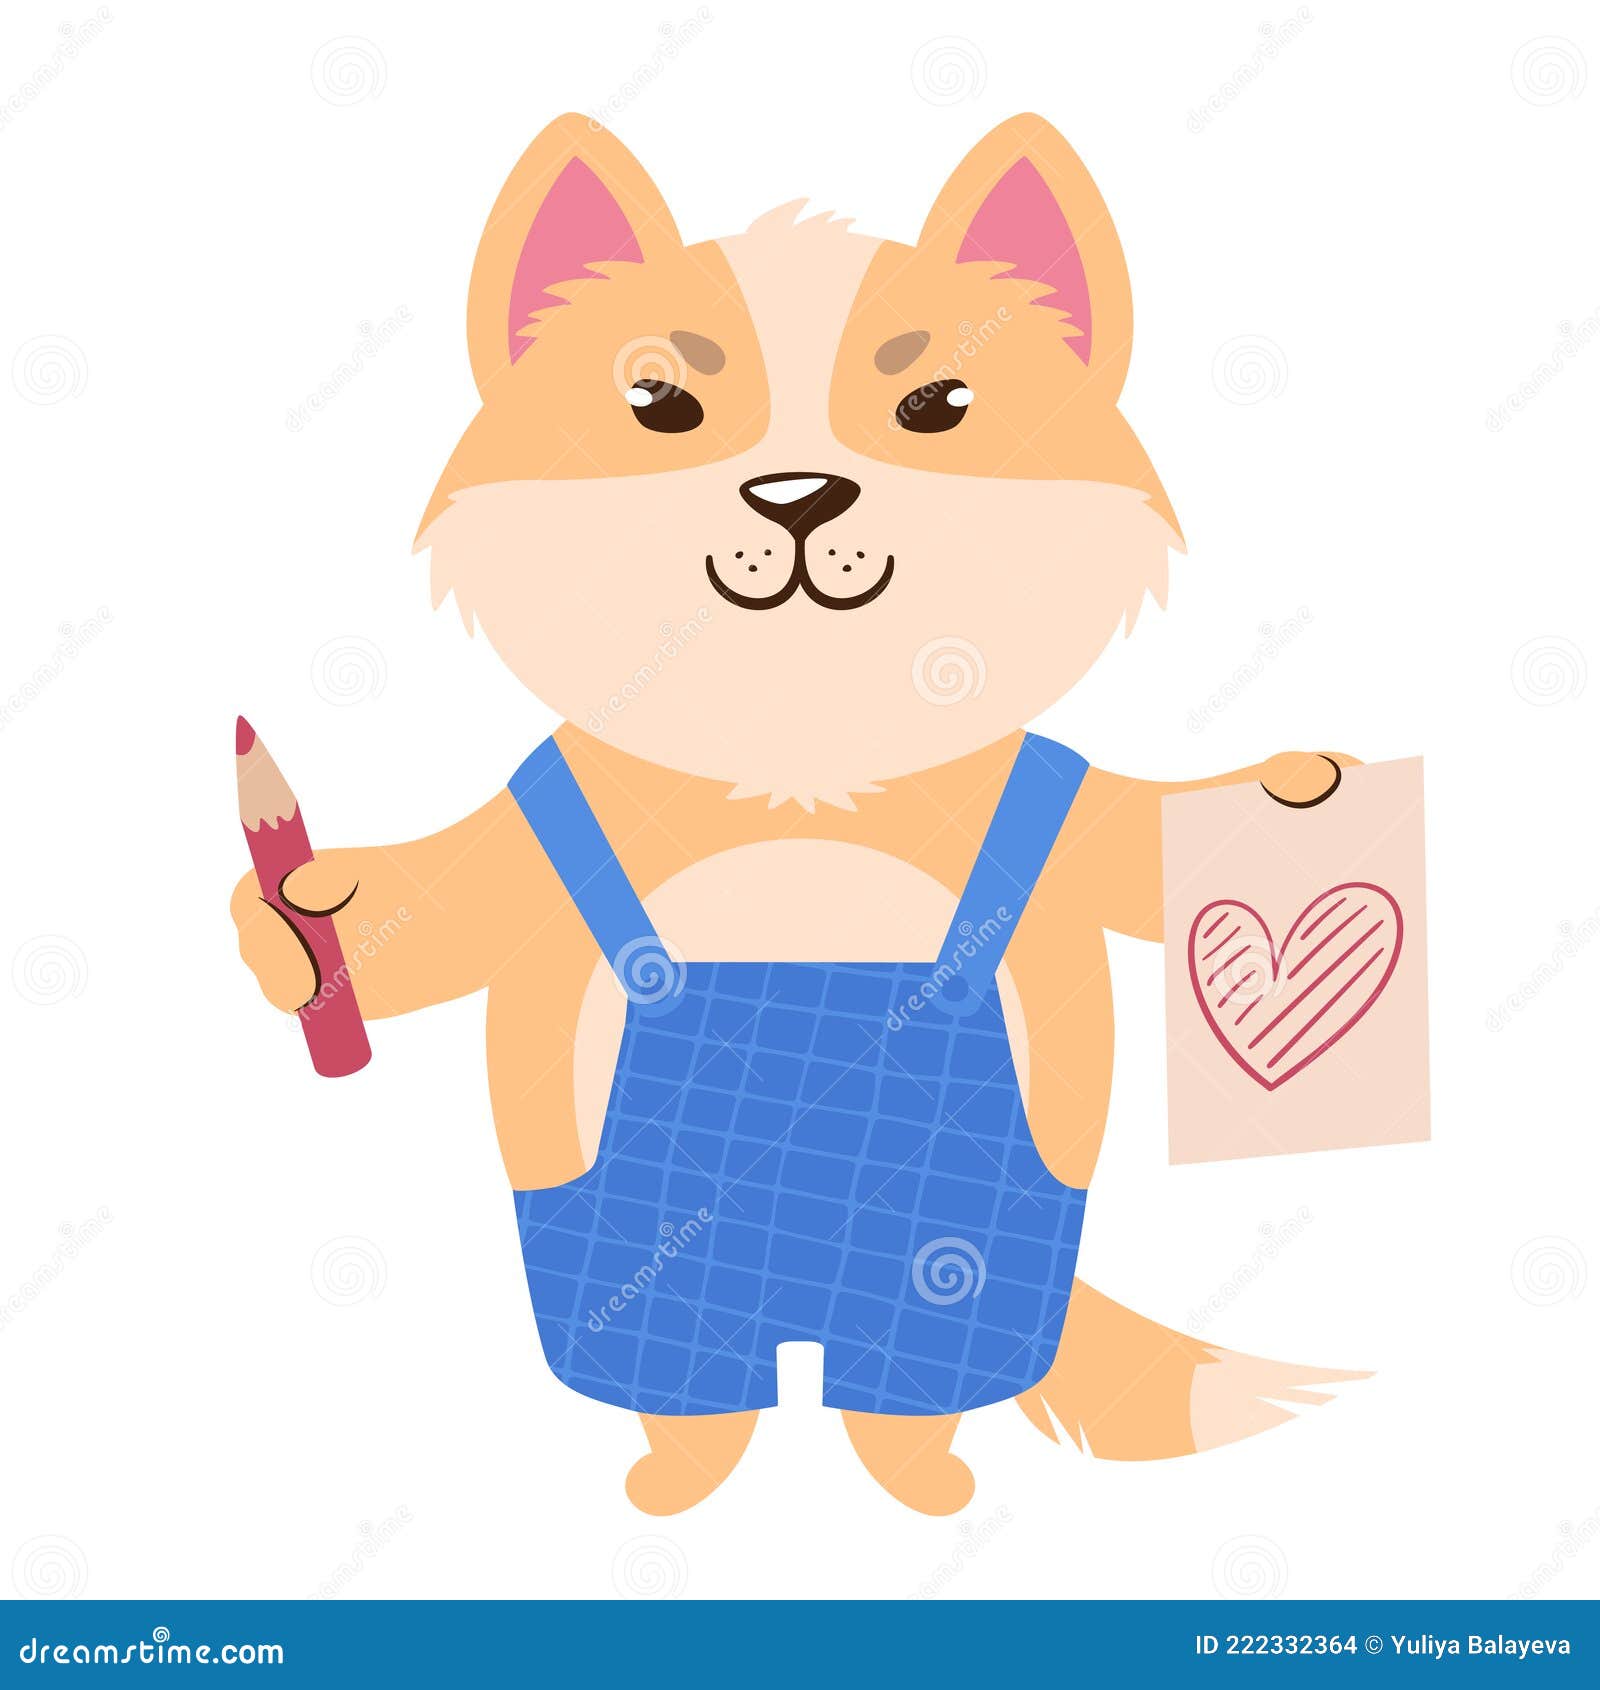 Vector Illustration of a Cute Cartoon Dog with Pencil and Sketch of a  Heart. Stock Vector - Illustration of pencil, graphic: 222332364